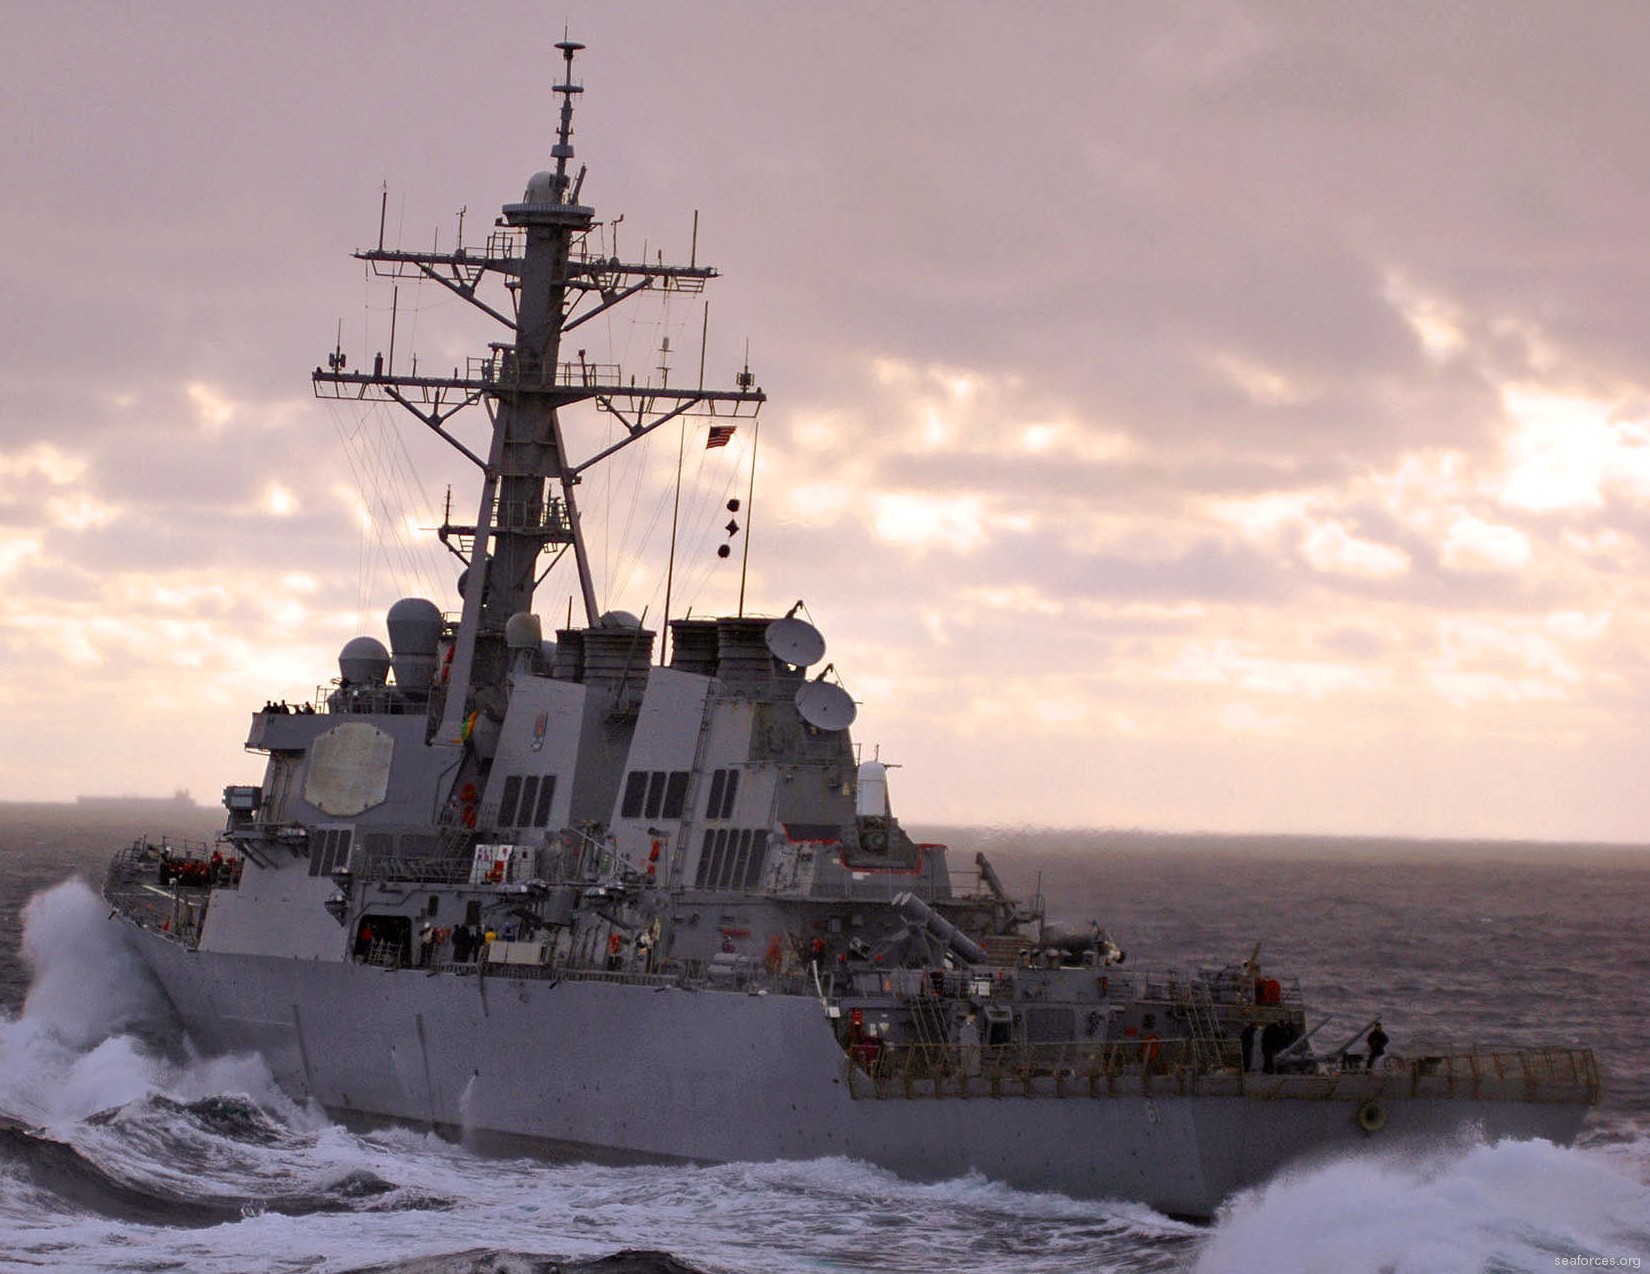 ddg-61 uss ramage guided missile destroyer us navy 63